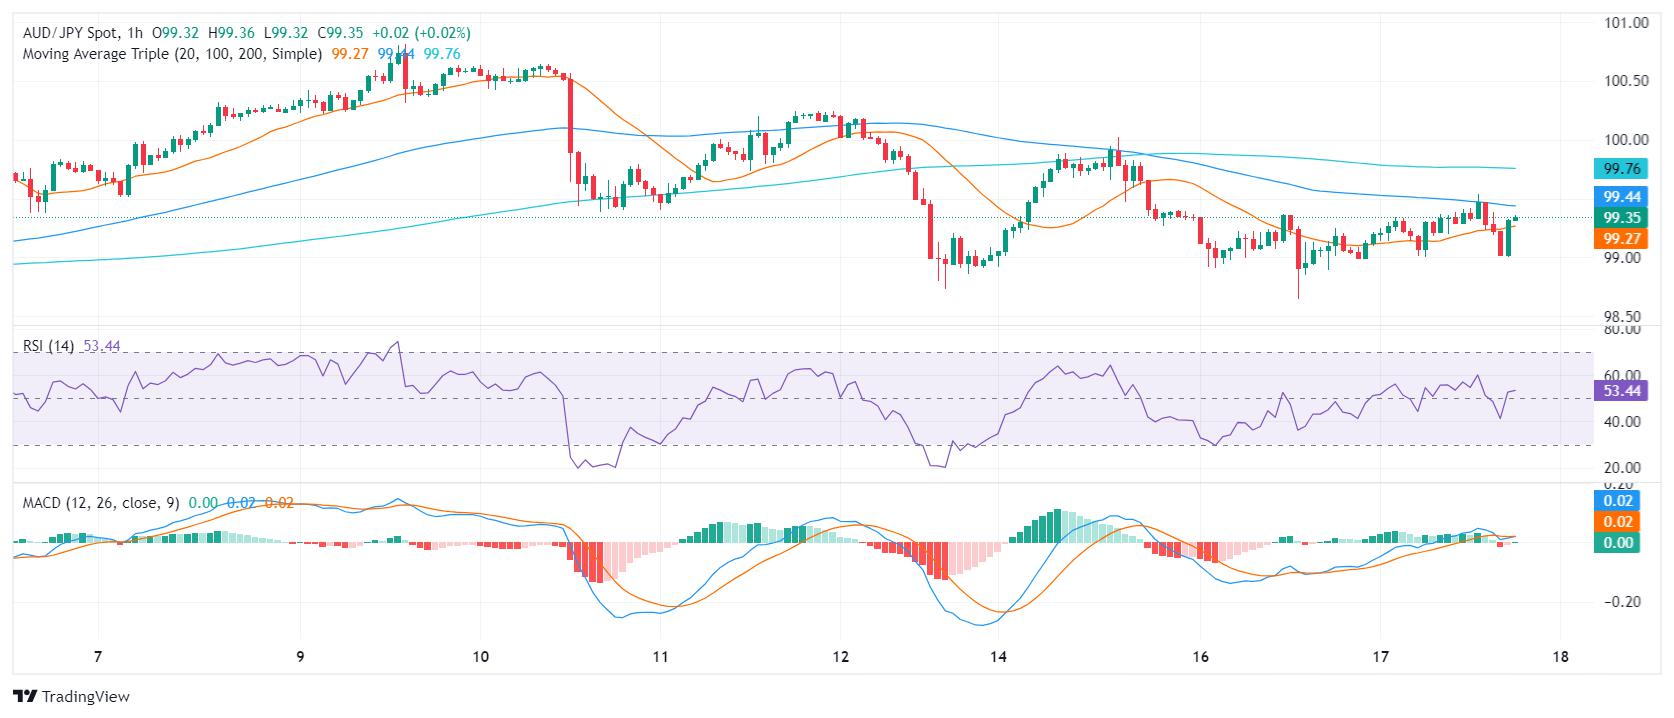 AUD/JPY Price Analysis: Bulls must regain the 20-day SMA to avoid further losses